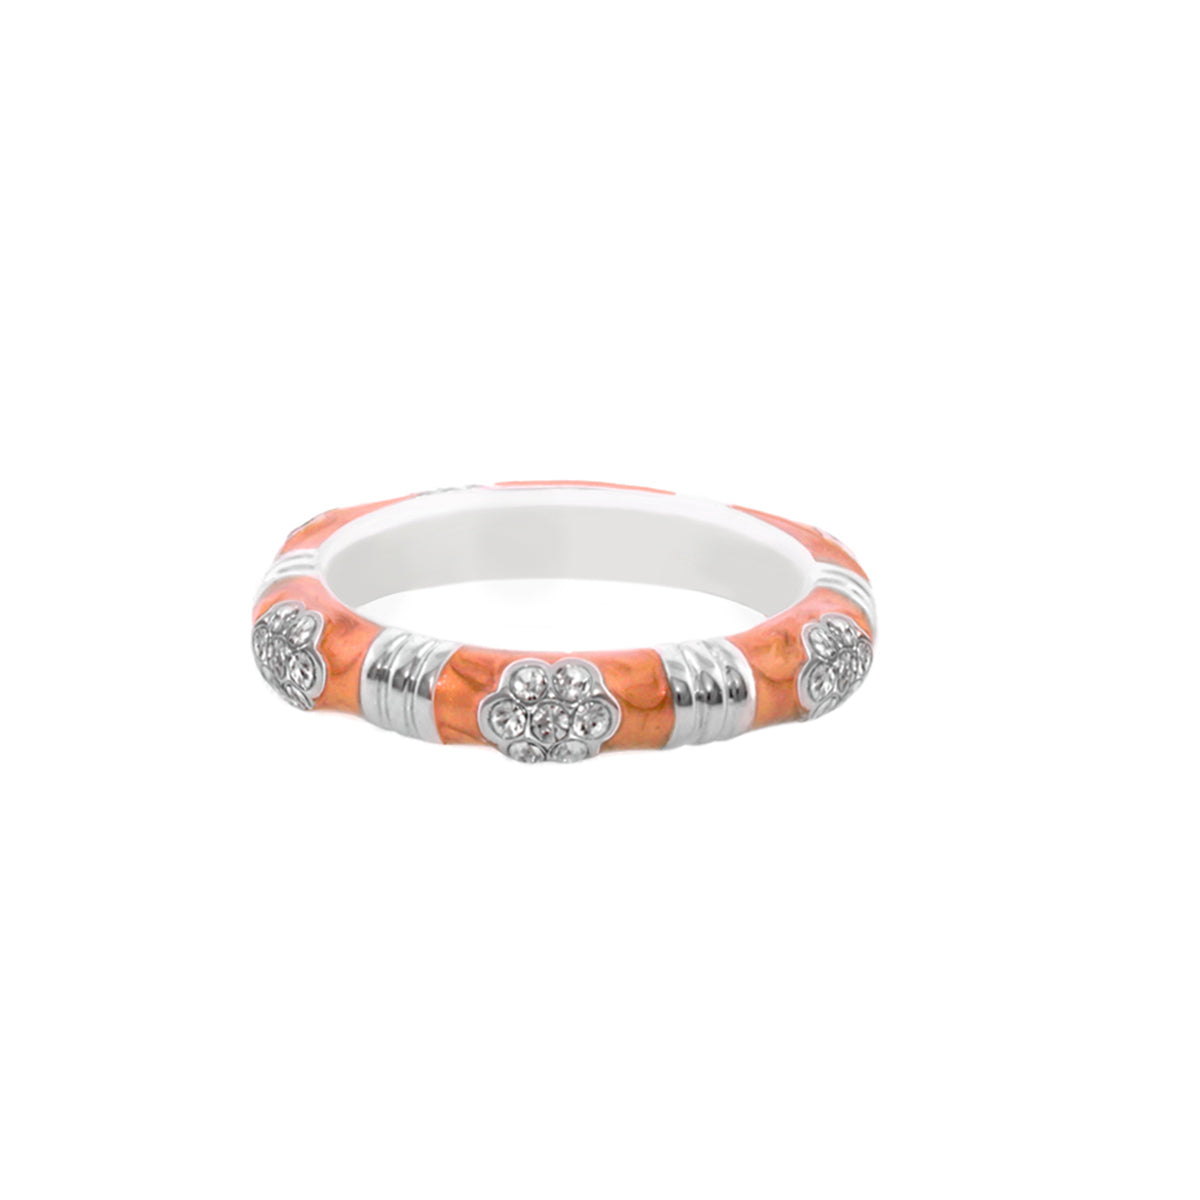 Daisy Love Stackable Ring